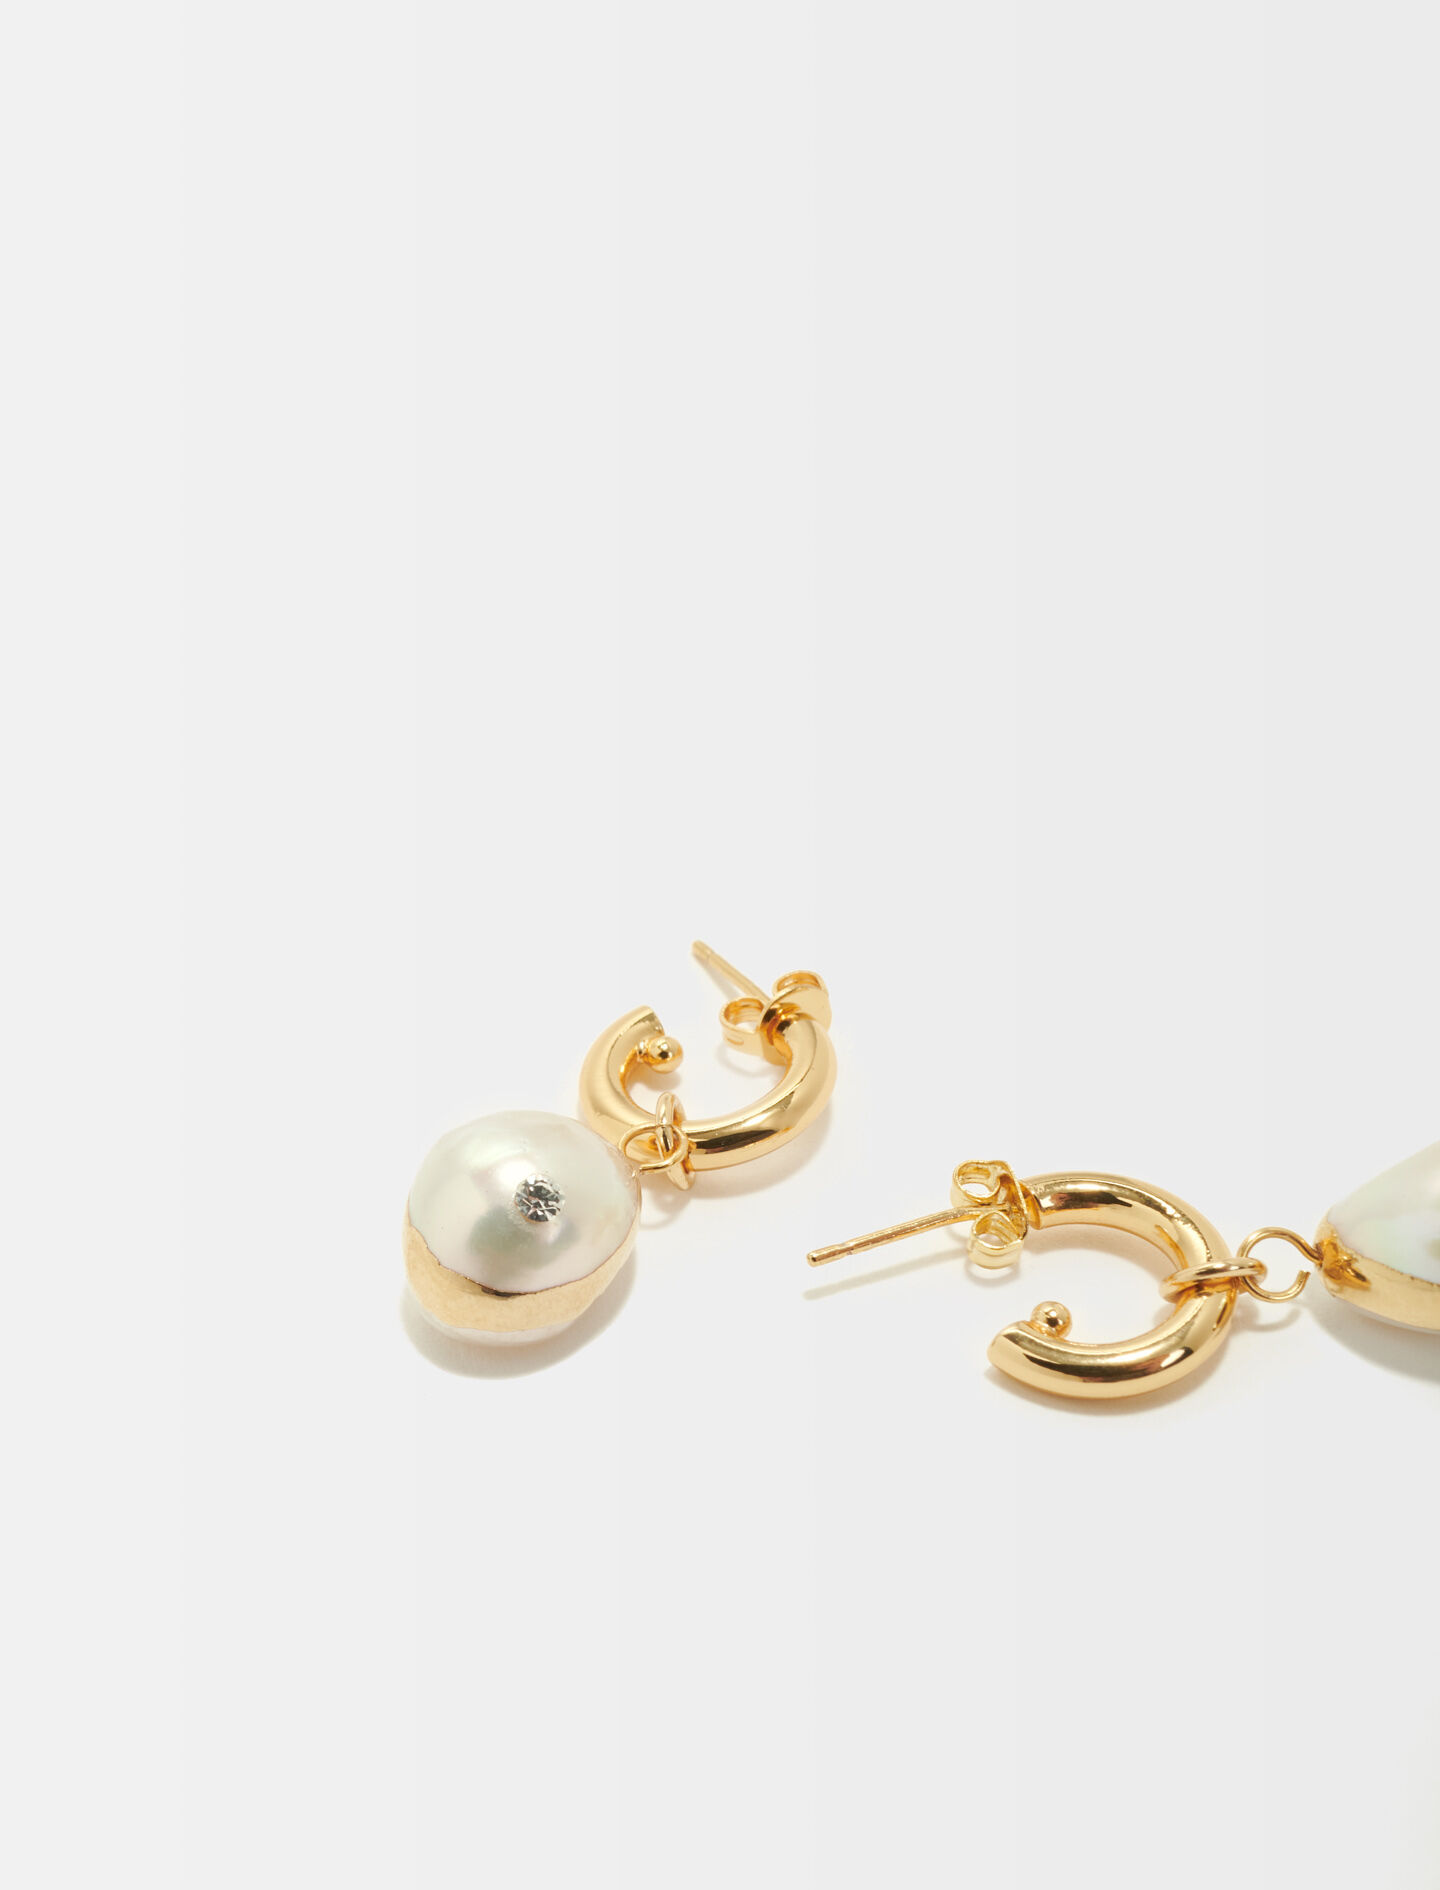 Pearl Jewelry | Saltwater & Freshwater Pearls: Water's Majestic Gems –  Arpaia®